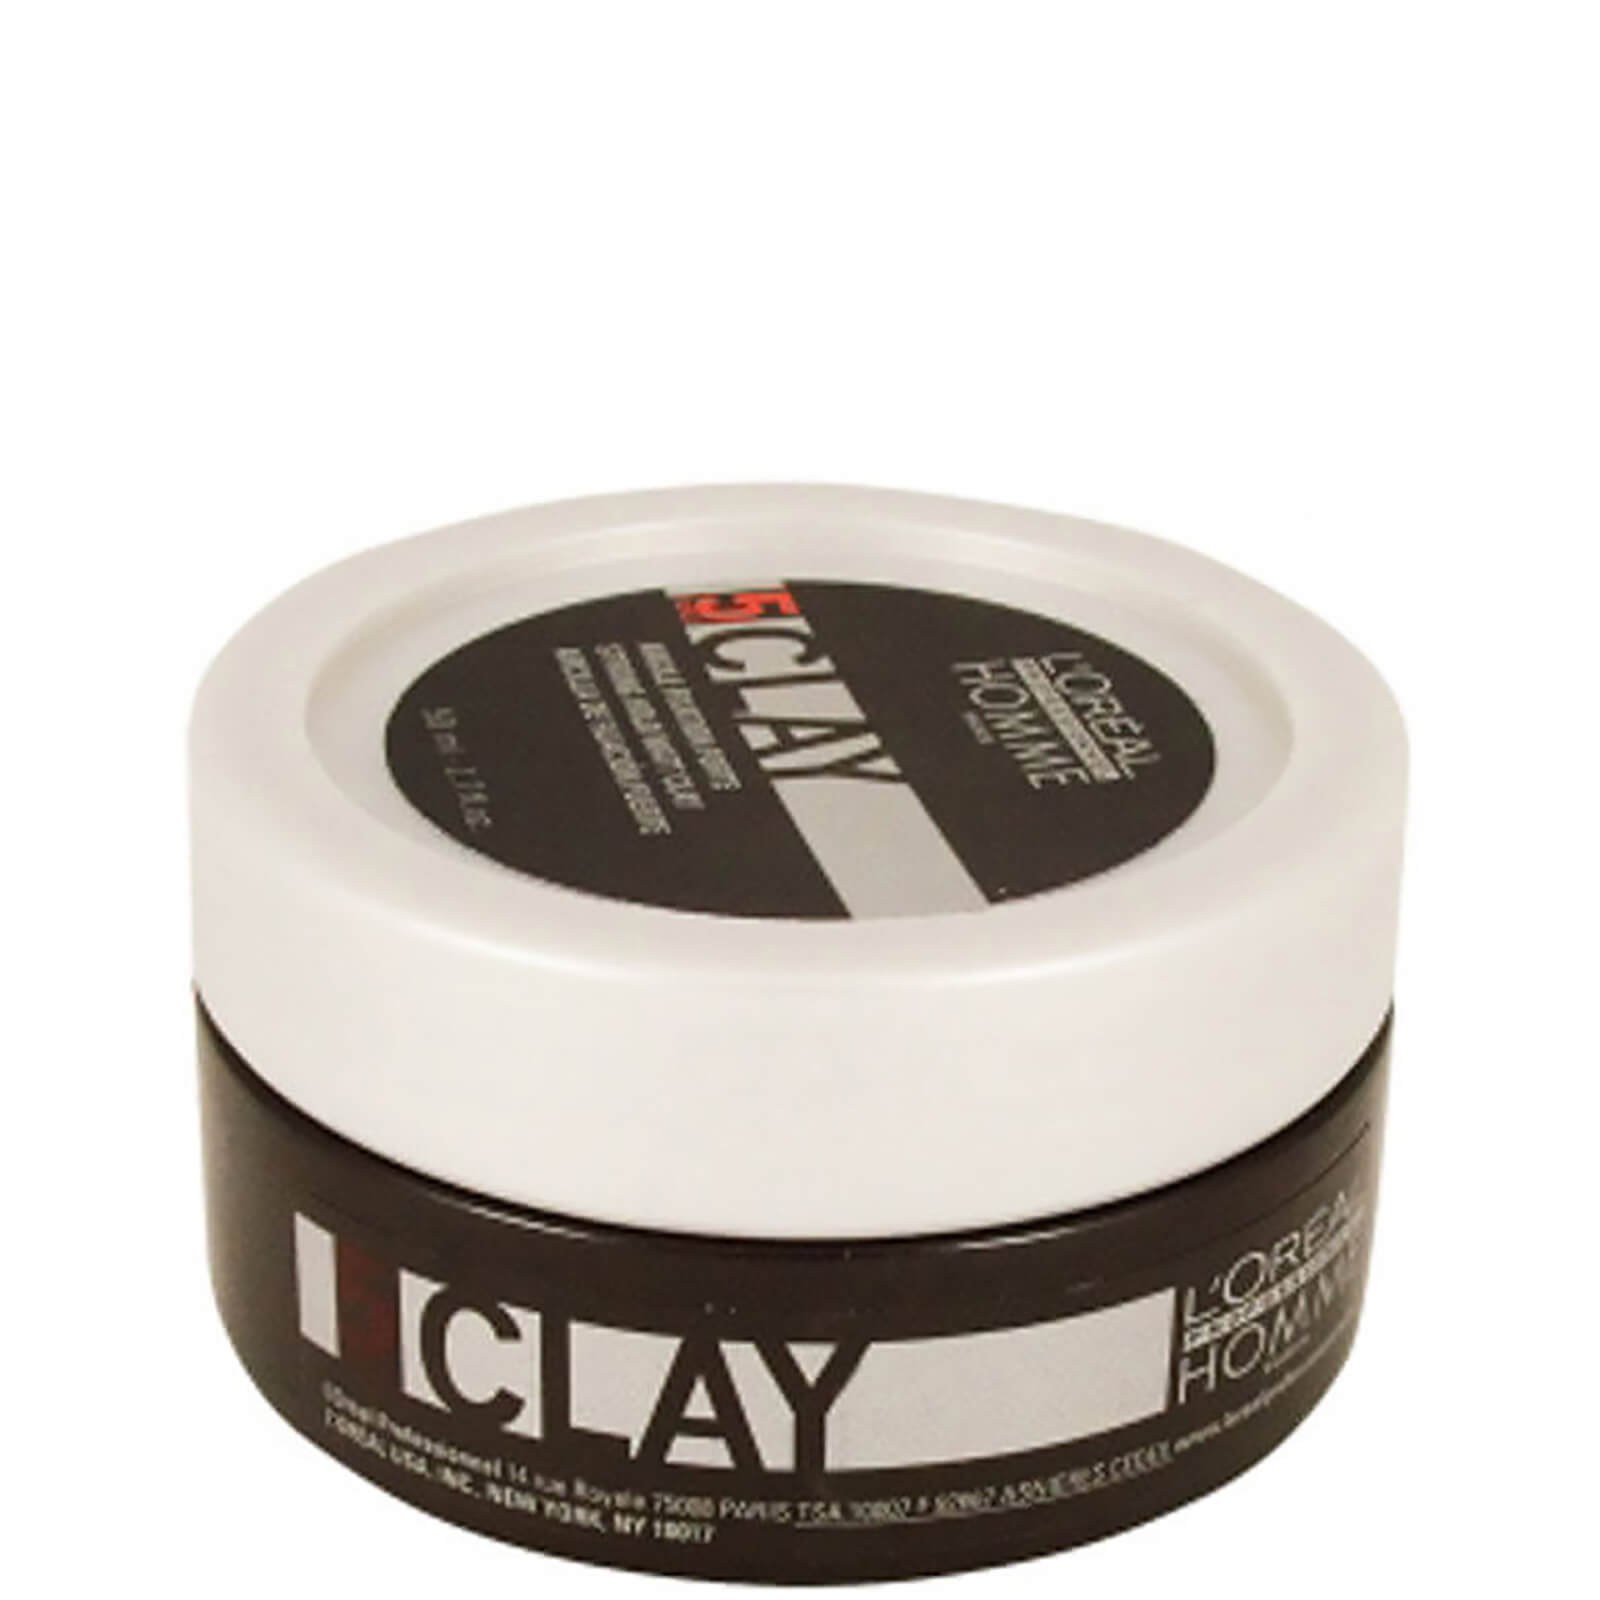 L'Oréal Professionnel Homme Clay – Strong Hold Clay (50 ml)